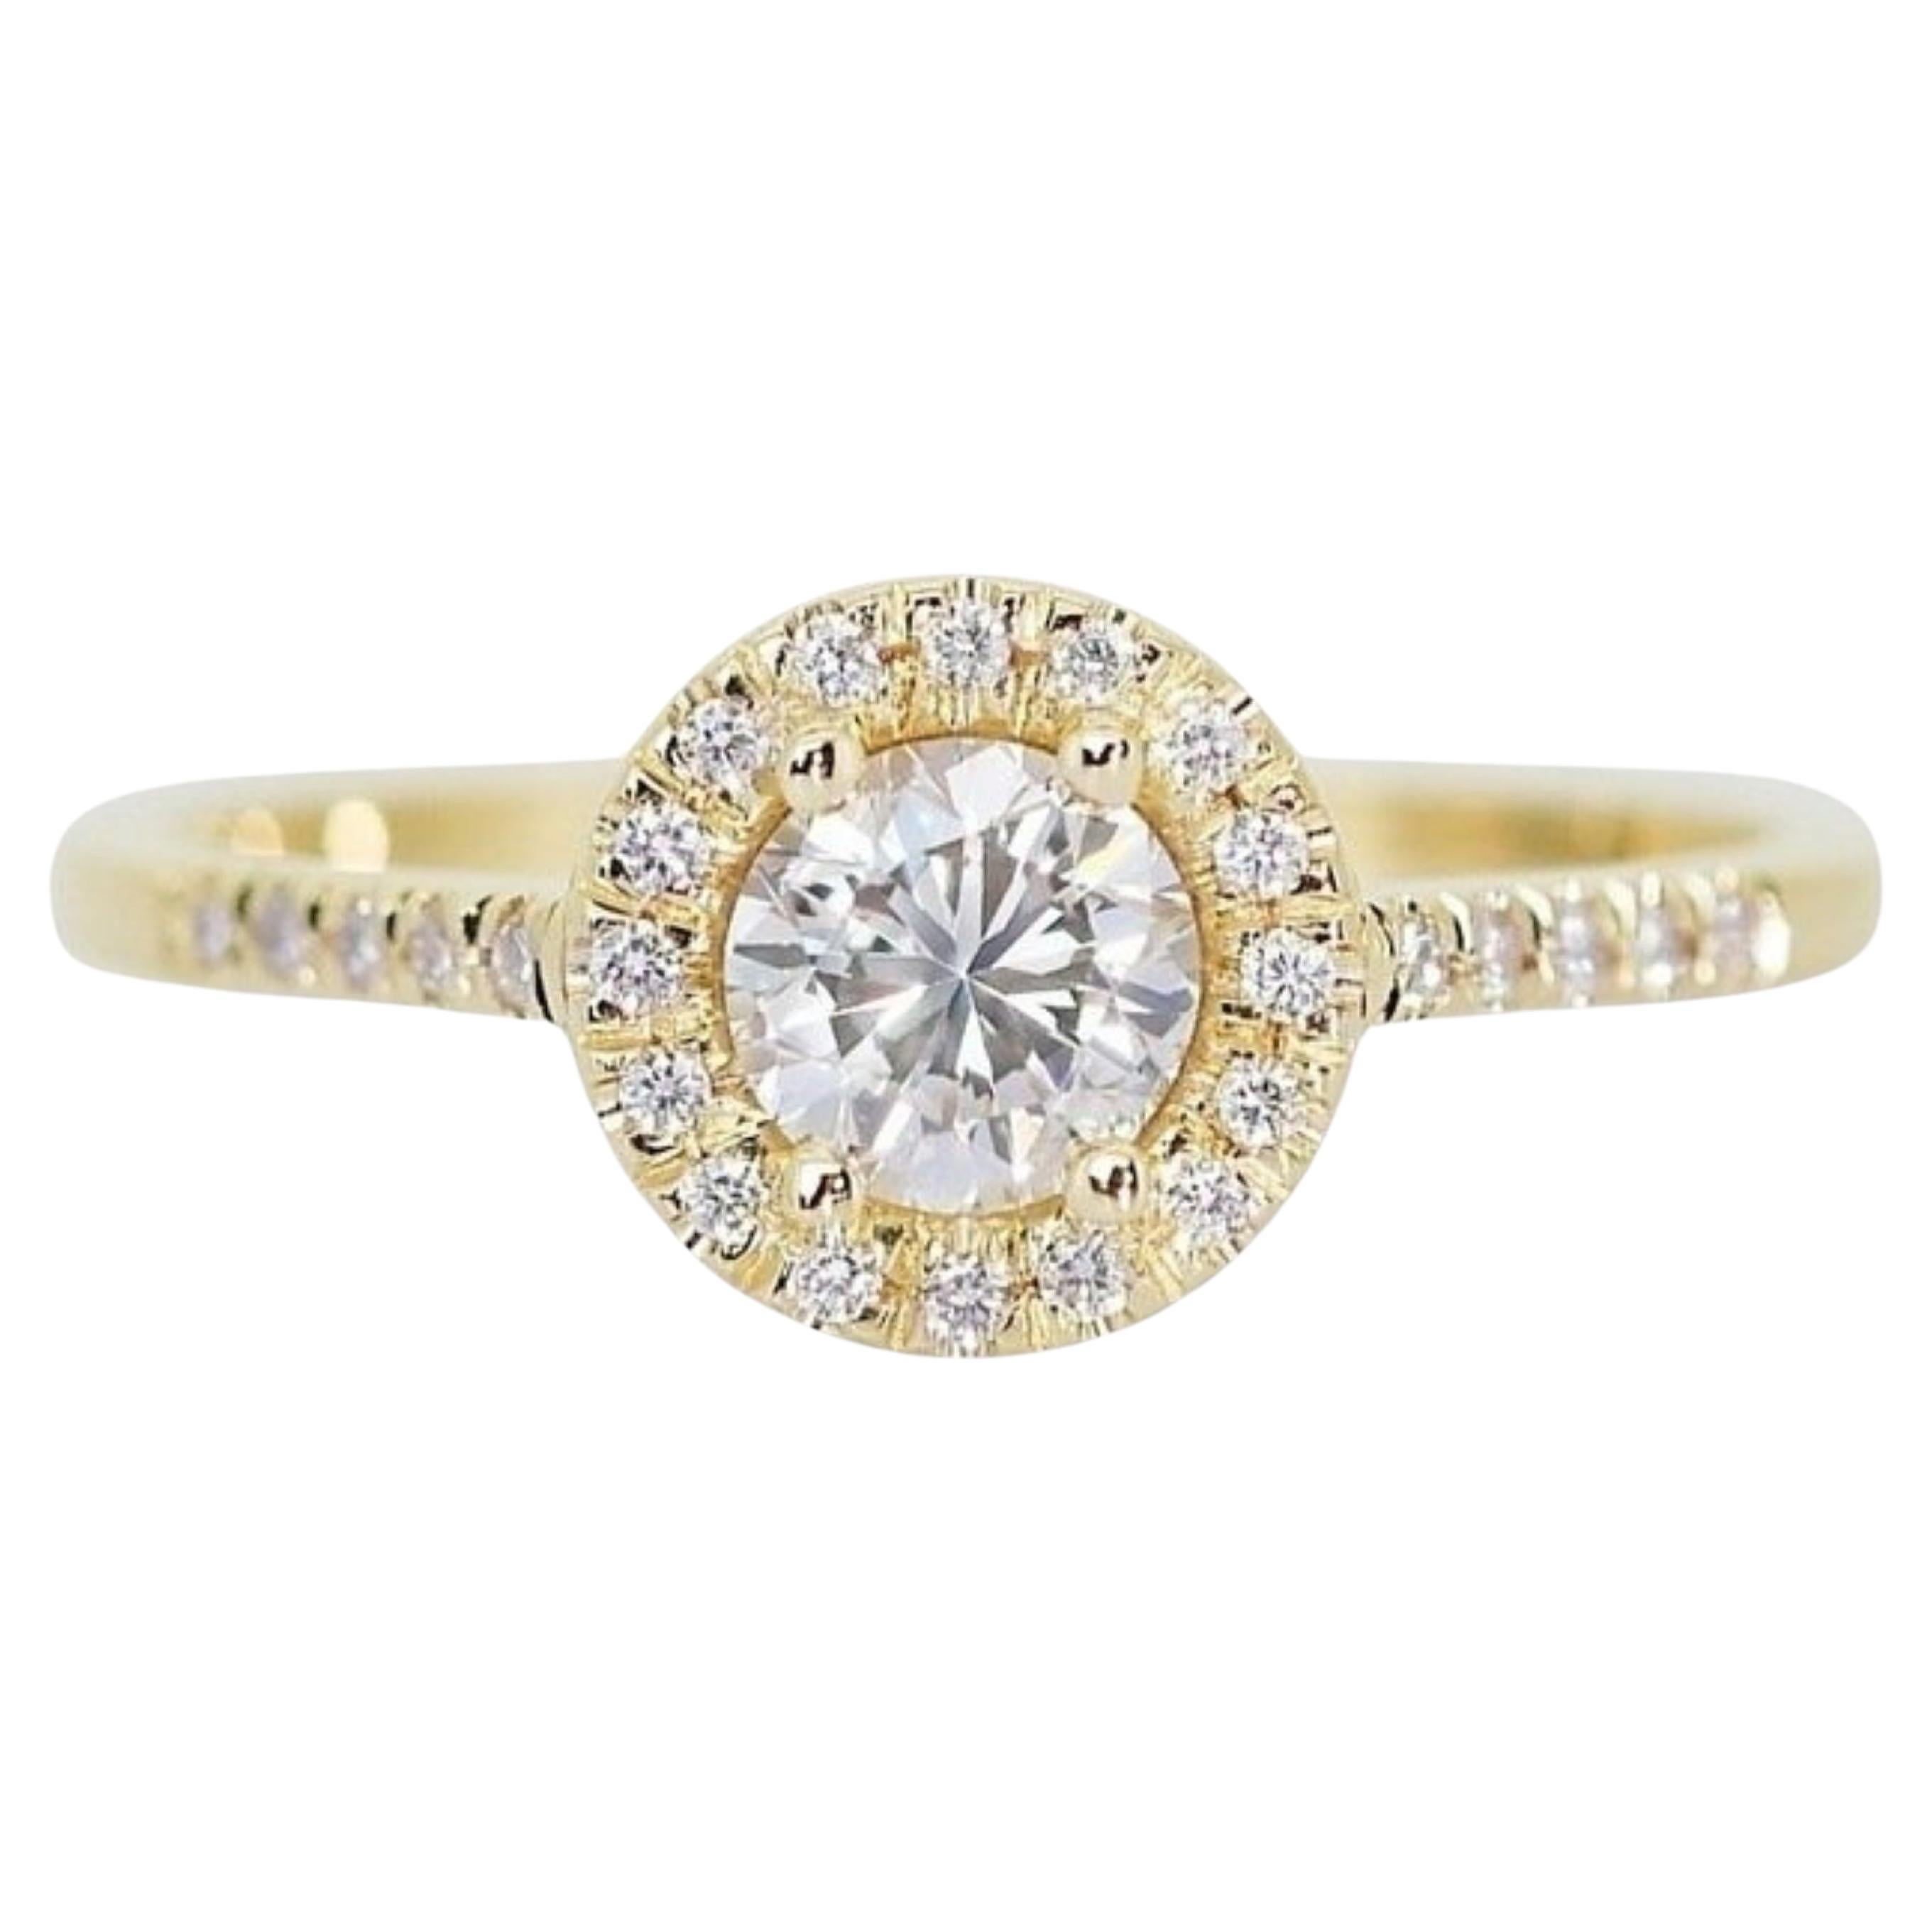 Marvelous 18k Yellow Gold Ring with 2.6 carat Natural Diamond